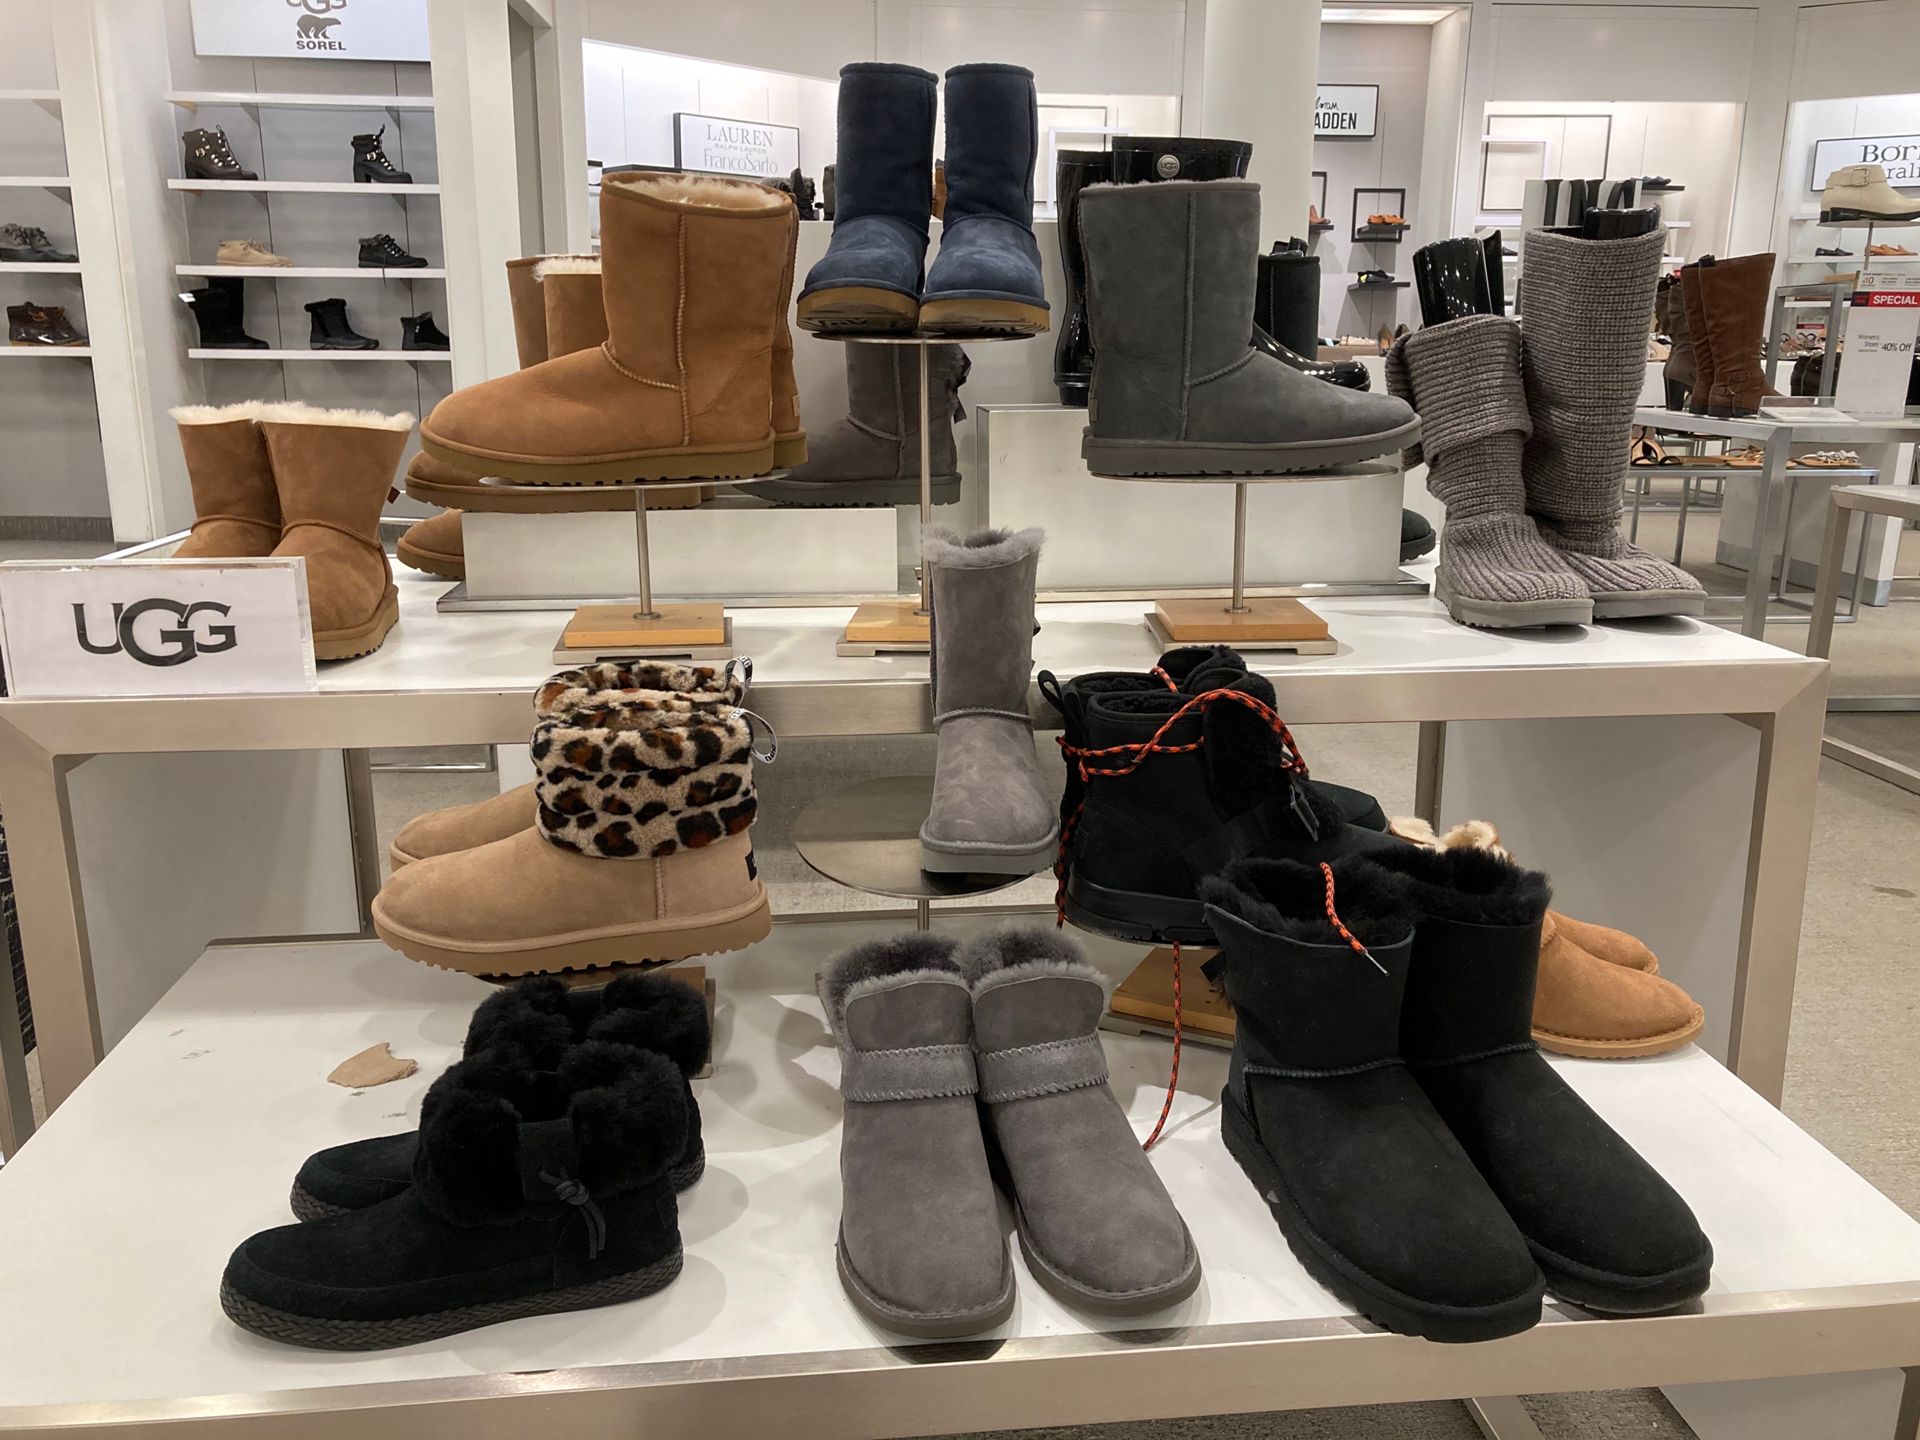 Need something warm for your toes ? Check out our womens selection of UGG  boots in our shoe department - Macys Style Crew